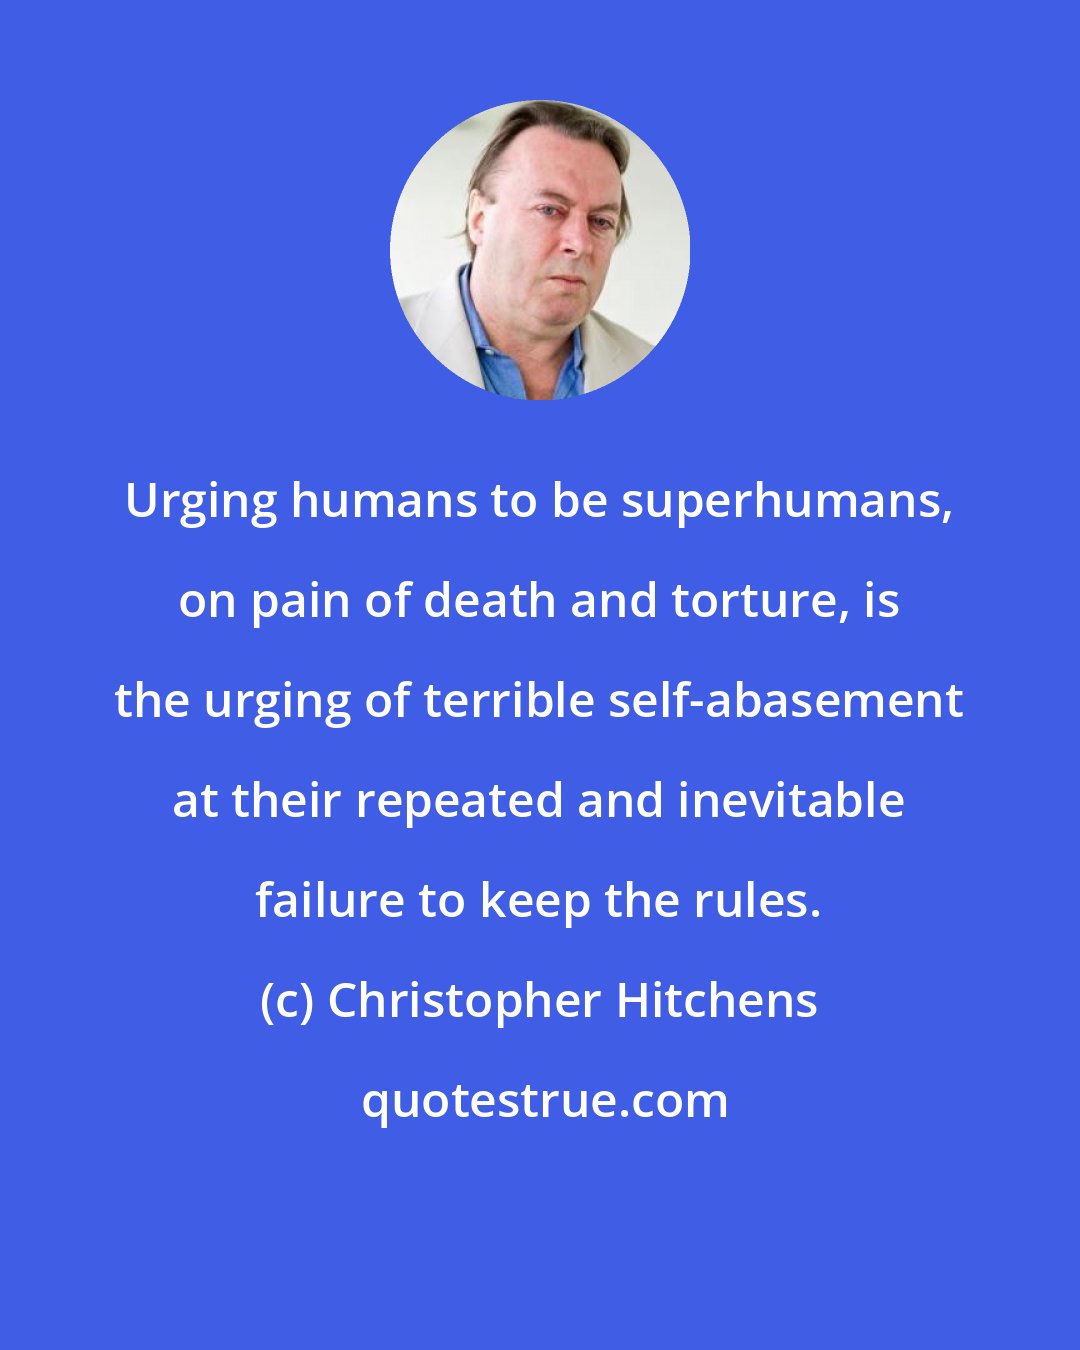 Christopher Hitchens: Urging humans to be superhumans, on pain of death and torture, is the urging of terrible self-abasement at their repeated and inevitable failure to keep the rules.